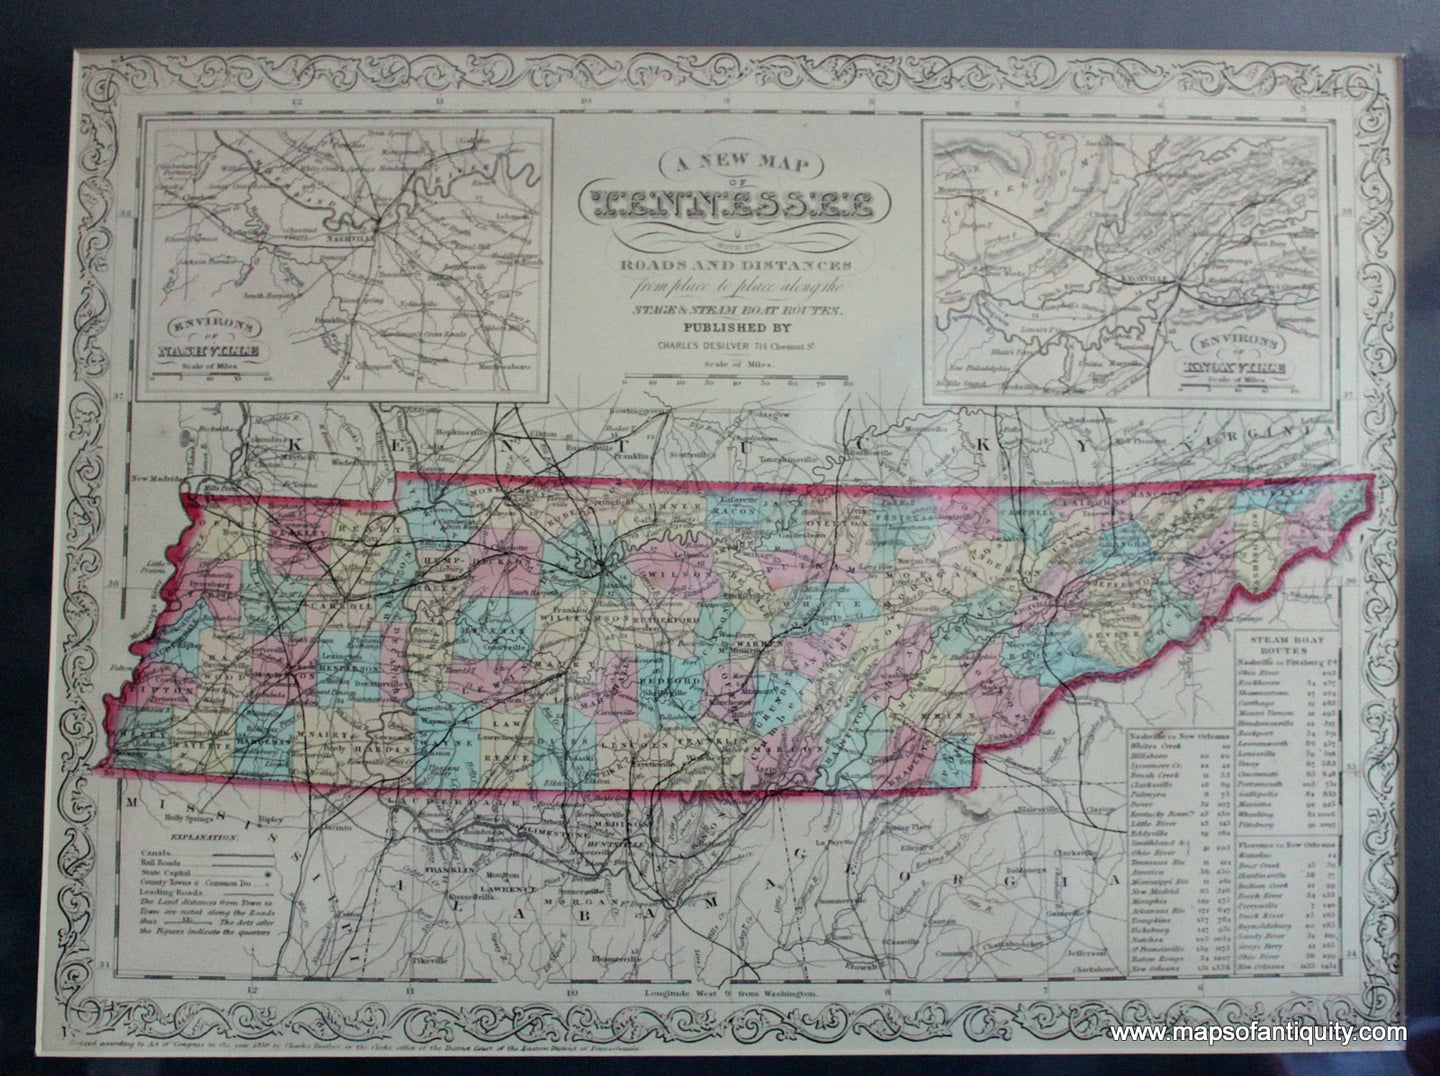 Antique-Hand-Colored-Map-A-New-Map-of-Tennessee-with-its-Roads-and-Distances-from-place-to-place-along-the-Stage-and-Steam-Boat-Routes.**********-United-States-South-1859-Desilver-Maps-Of-Antiquity